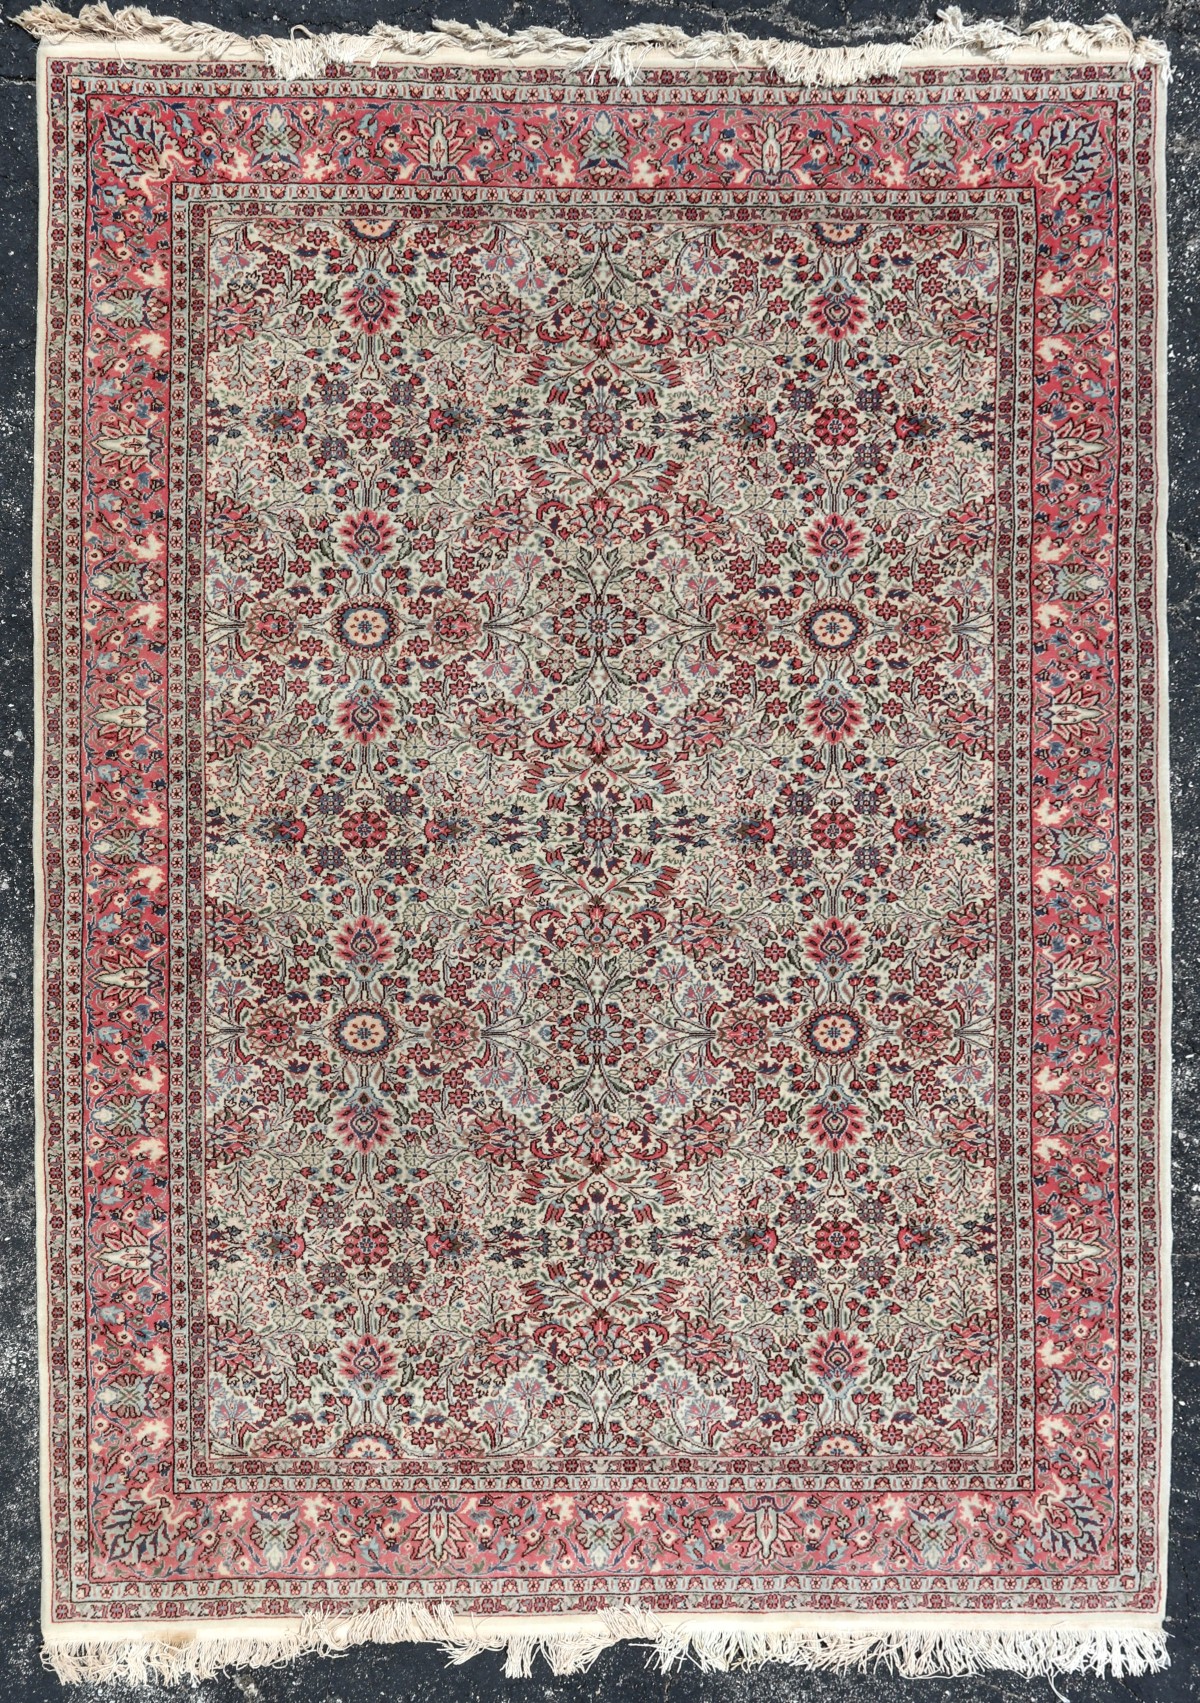 A HAND MADE ROOM-SIZED INDO PERSIAN RUG